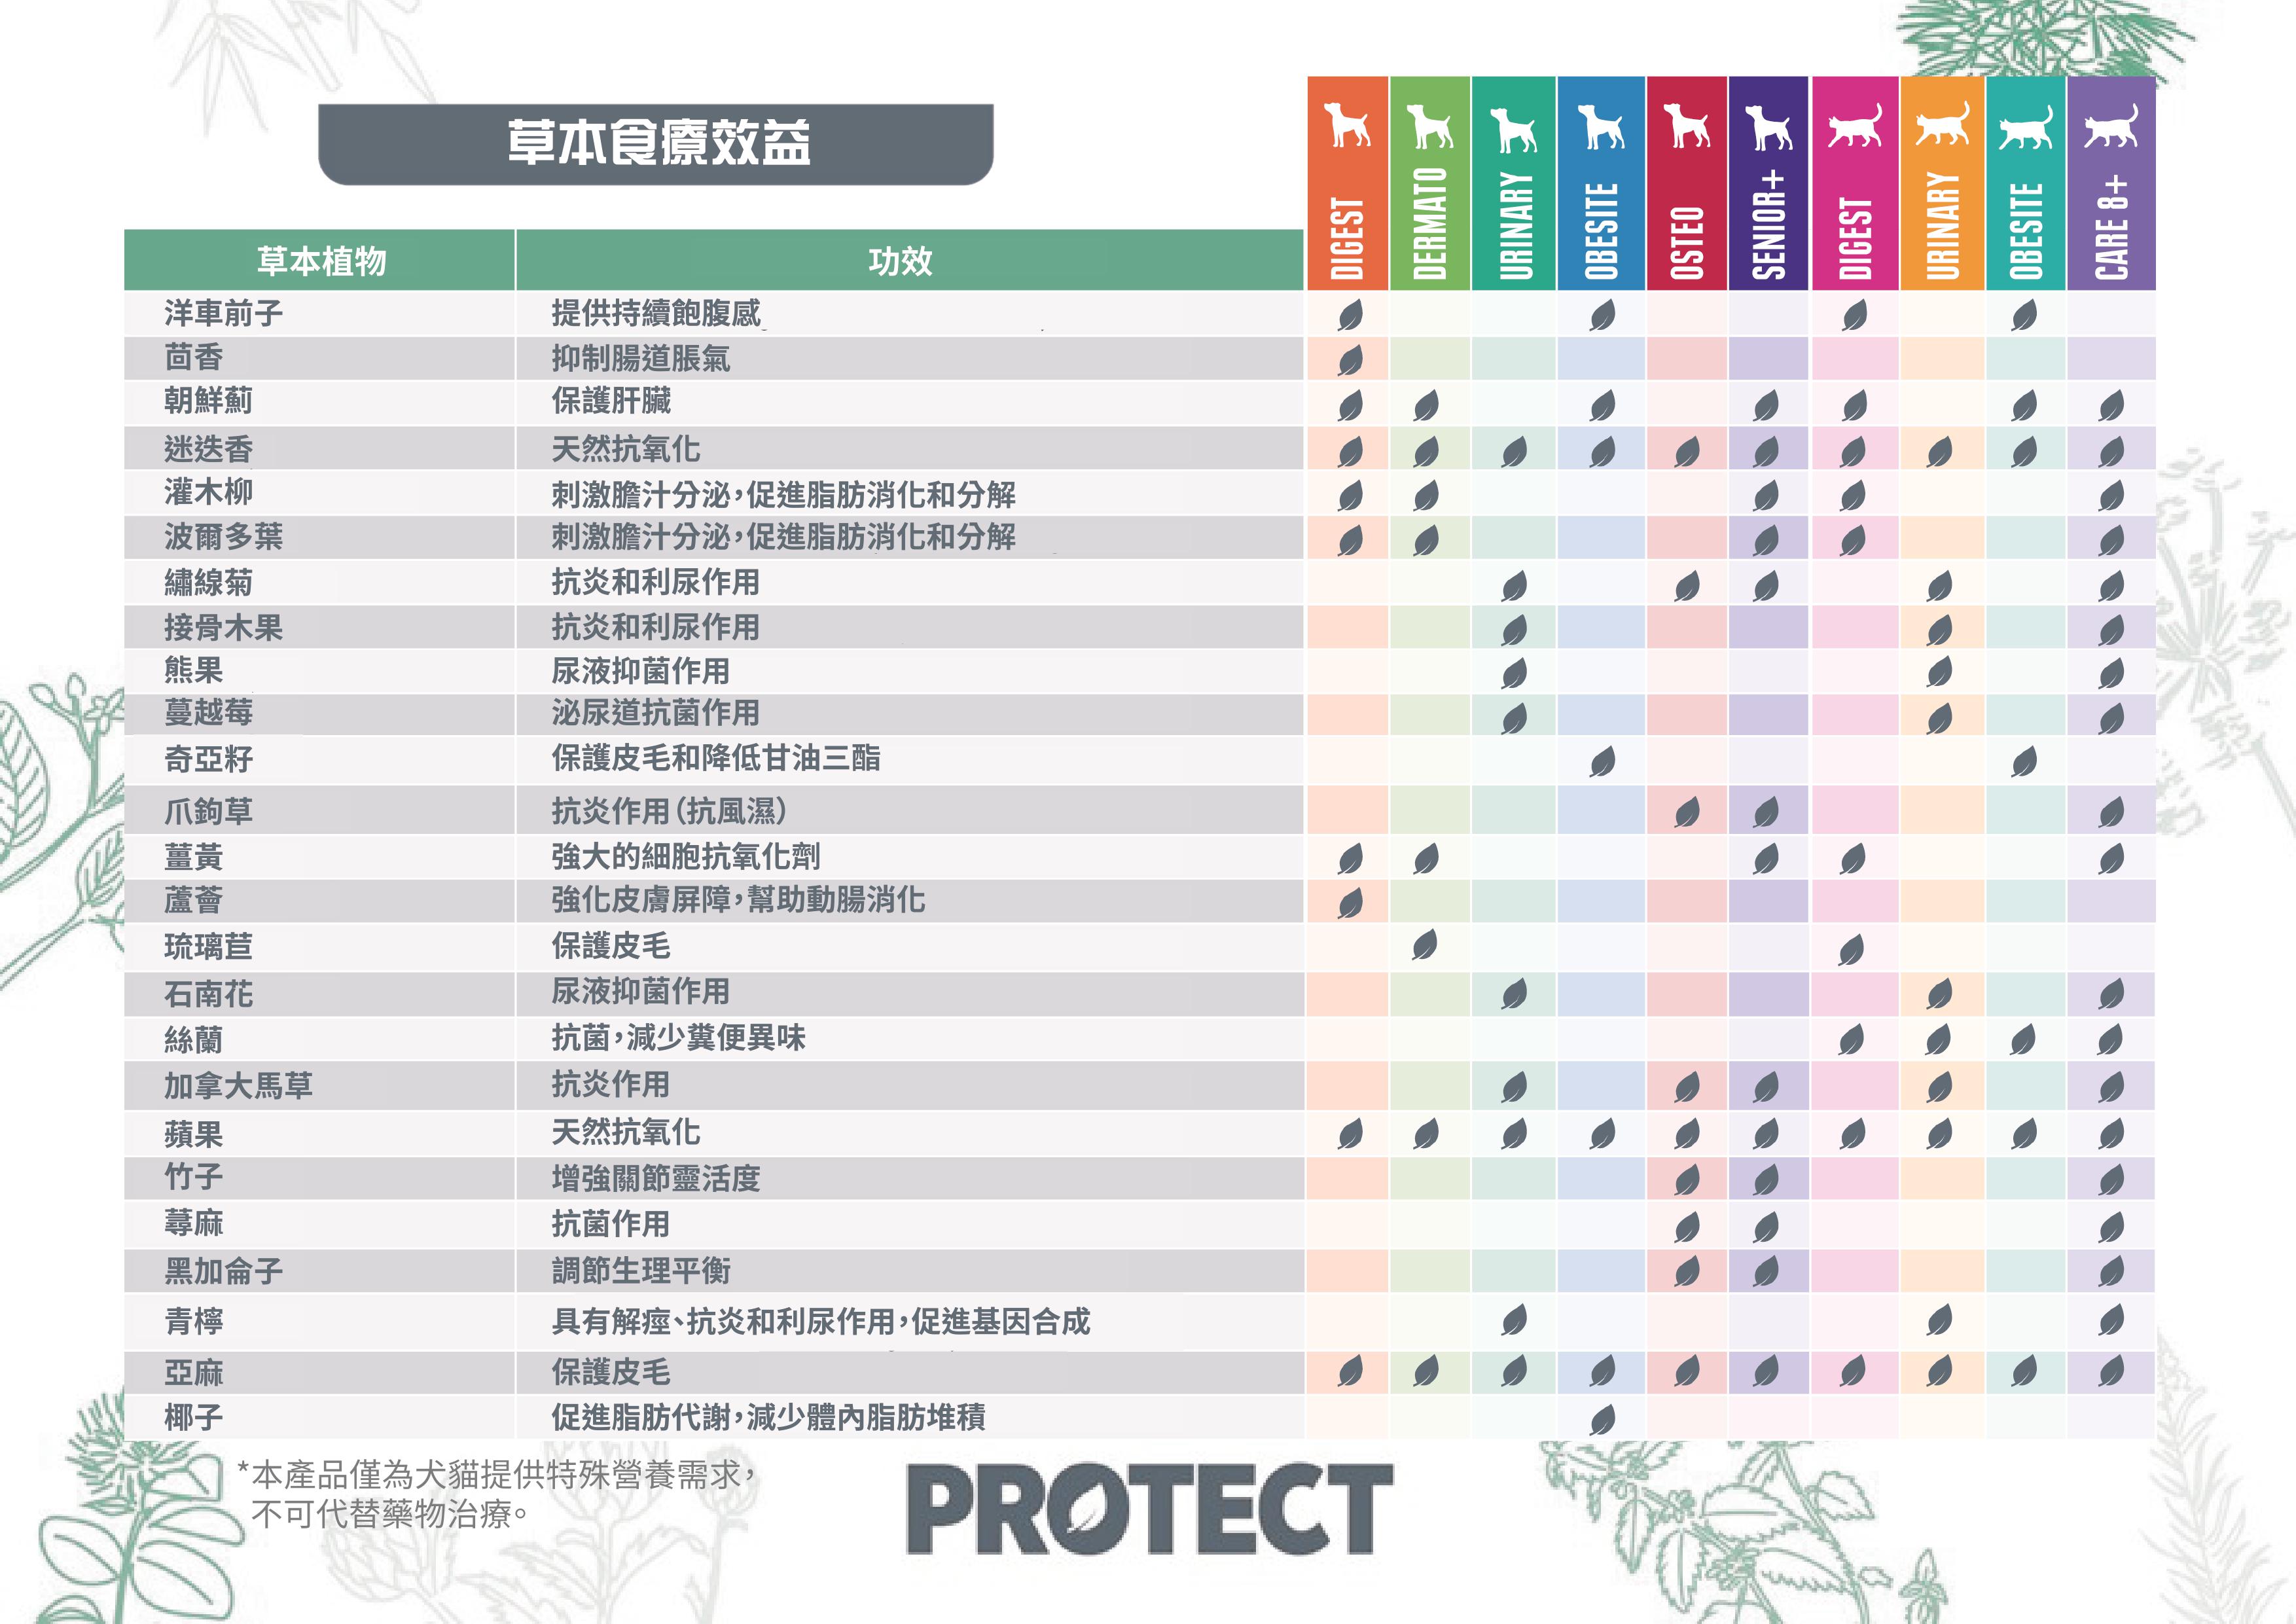 protect-composition-chart.jpg